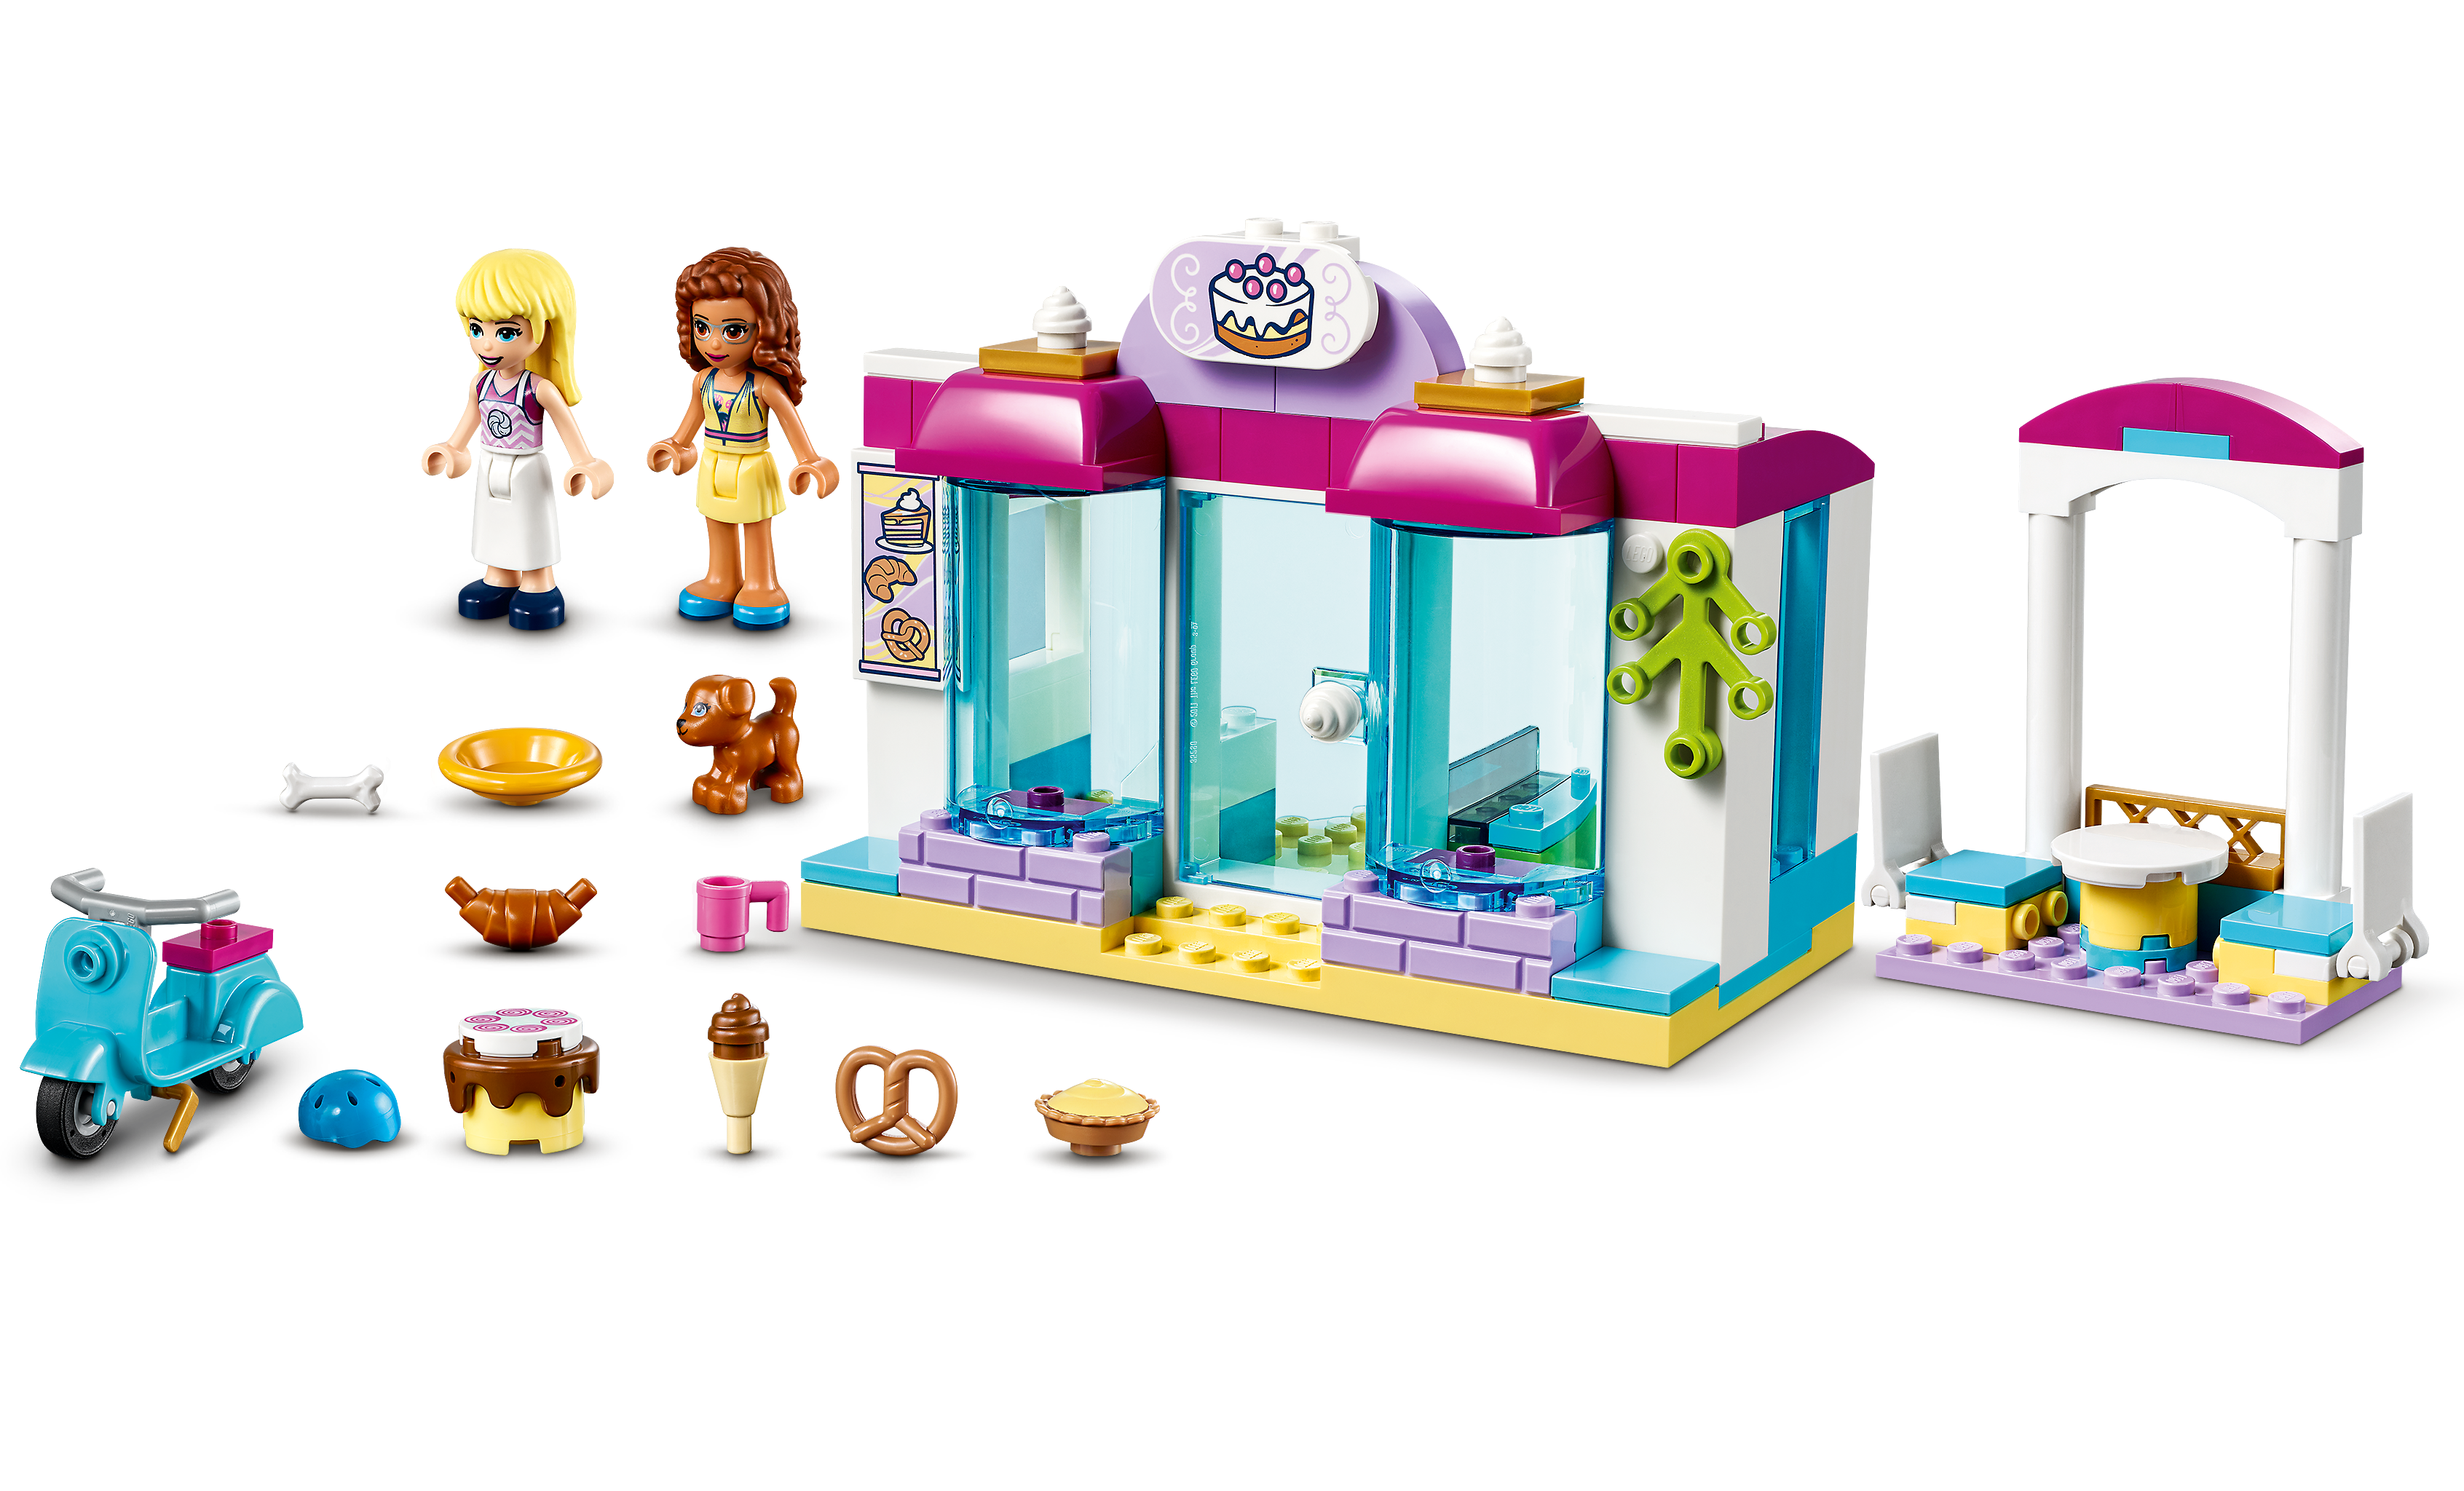 99 Pieces New 2021 LEGO Friends Heartlake City Bakery 41440 Building Kit; Kids Café Toy Playset Friends Stephanie and Olivia; Collectible Toy 